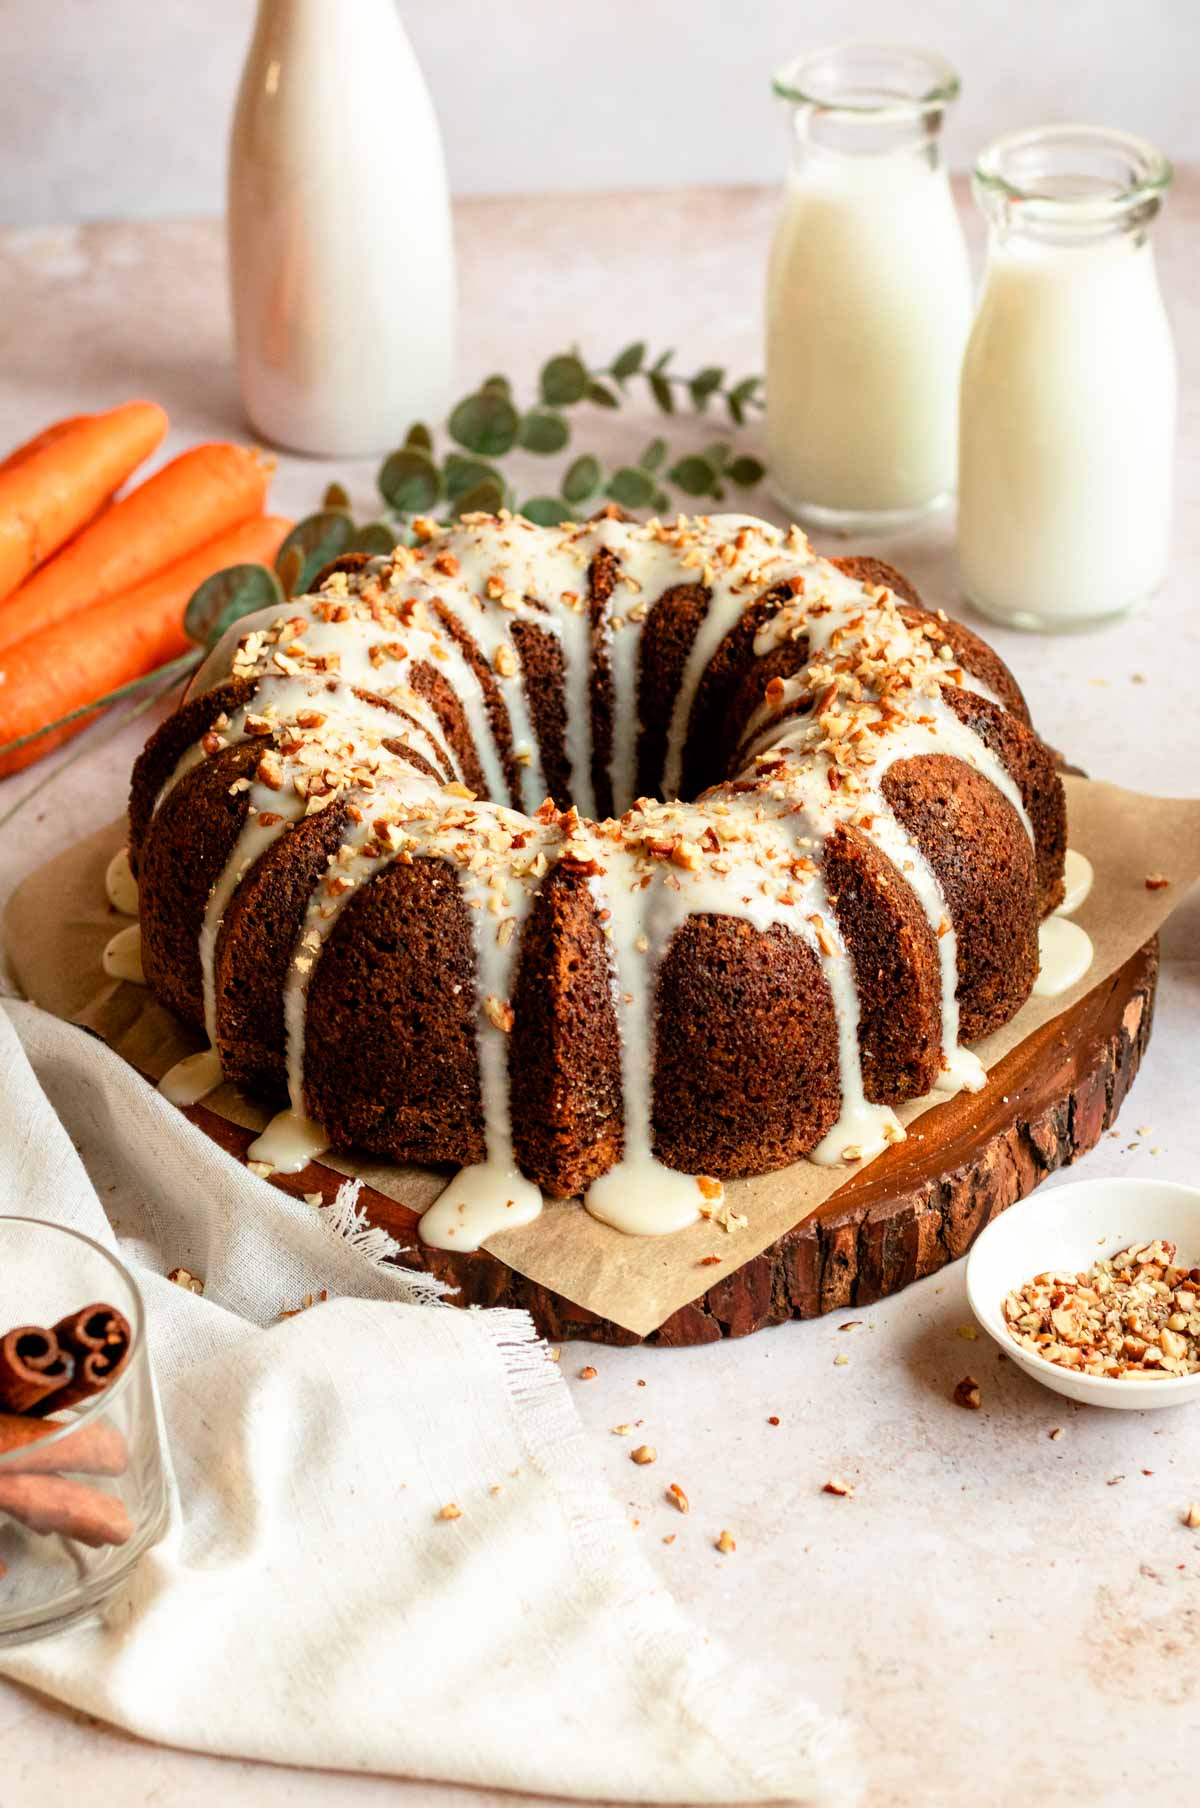 Bundt carrot cake with cream cheese frosting.